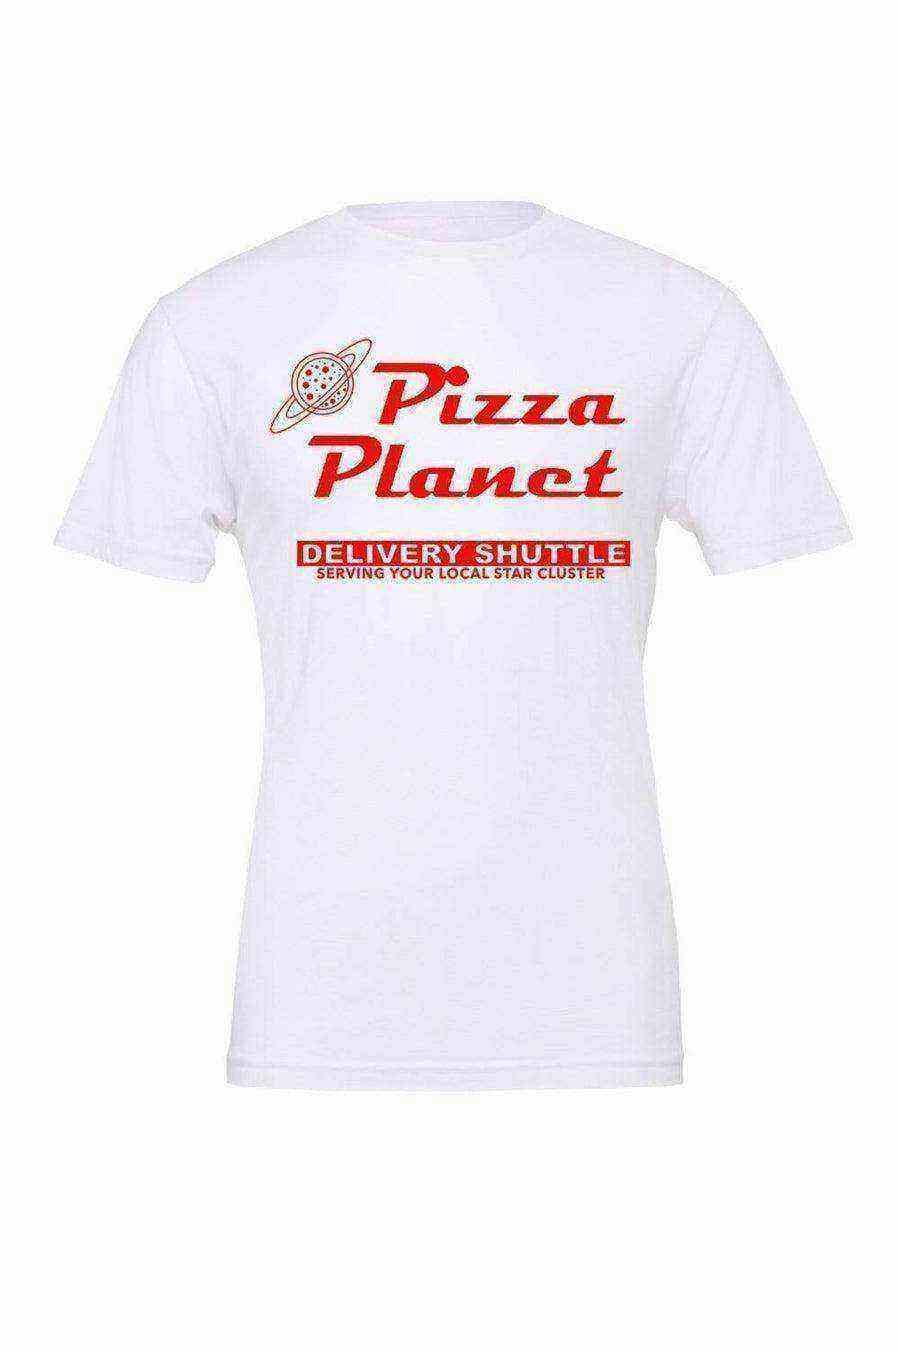 Toddler | Pizza Planet Tee | Toy Story Shirt - Dylan's Tees